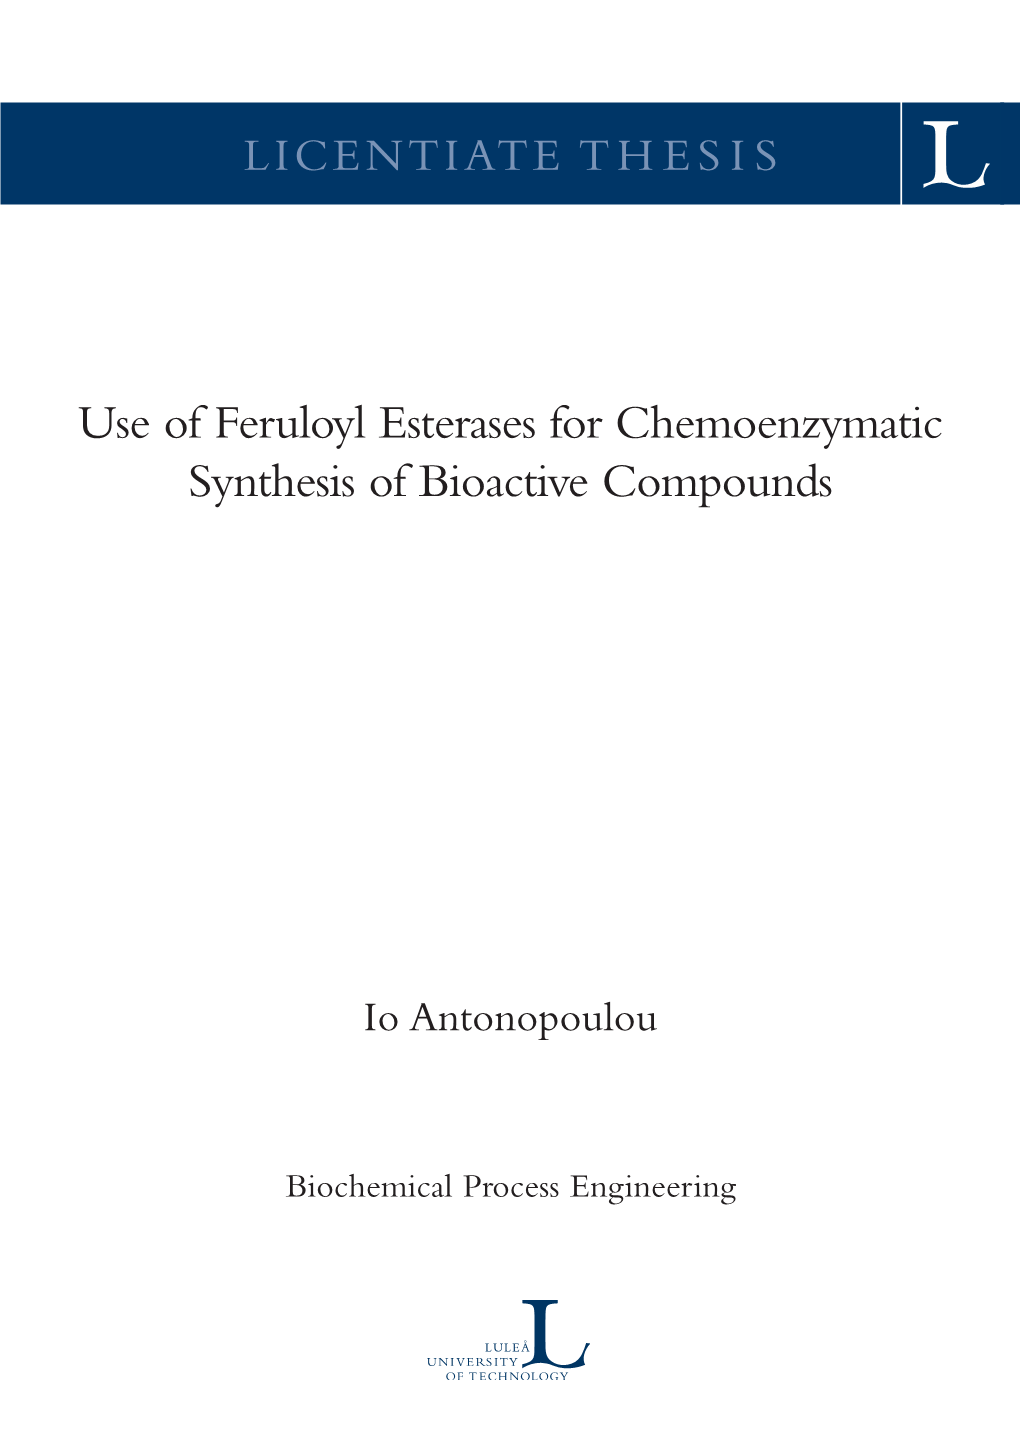 Use of Feruloyl Esterases for Chemoenzymatic Synthesis of Bioactive Compounds